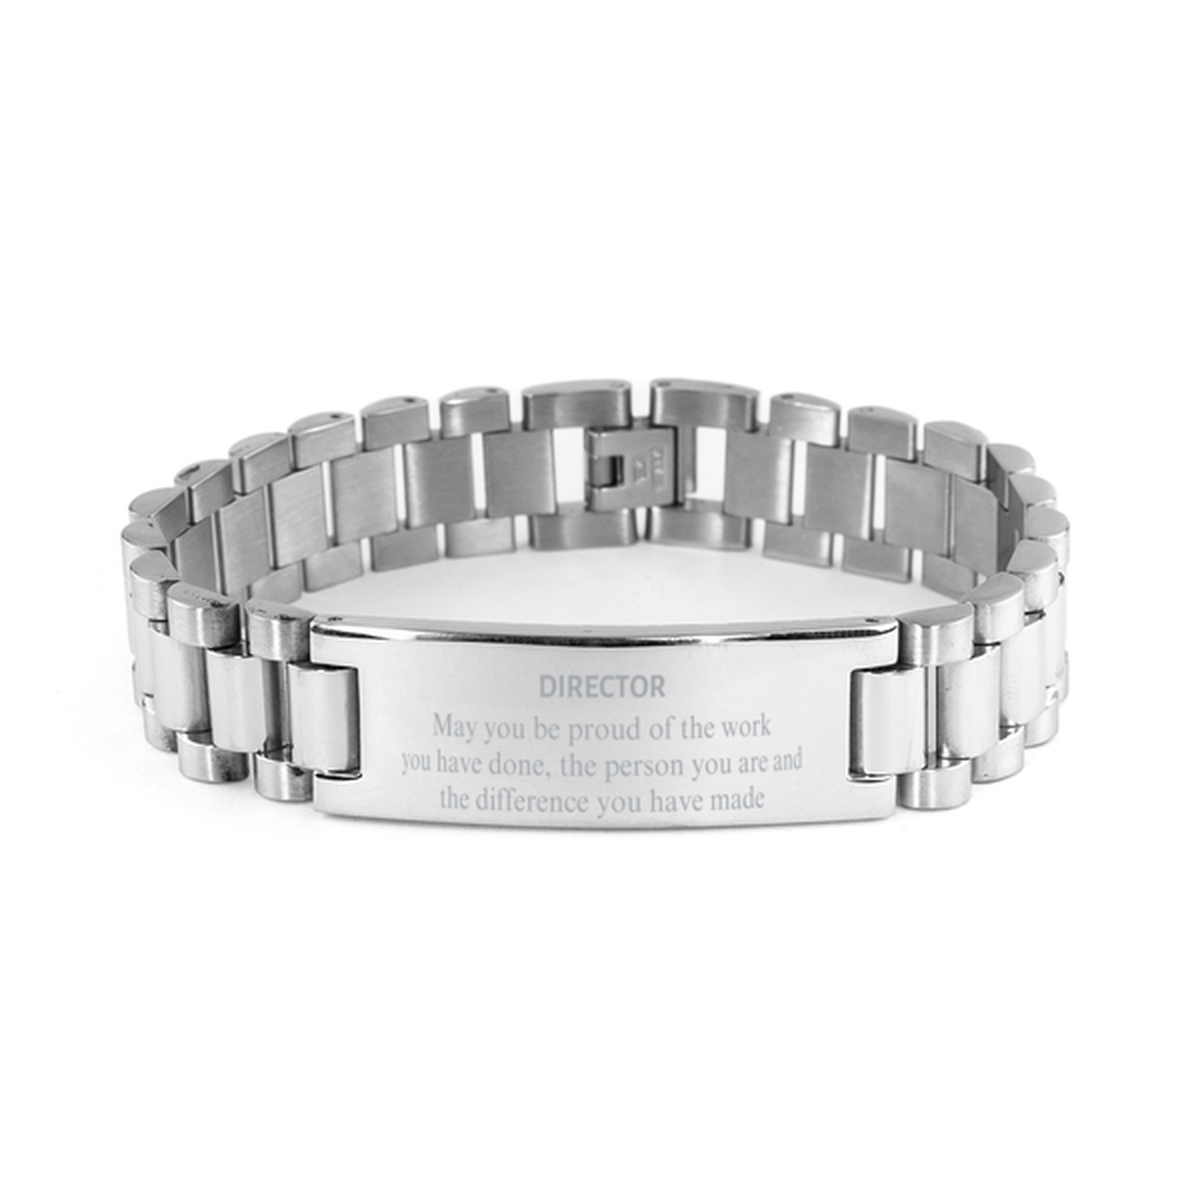 Director May you be proud of the work you have done, Retirement Director Ladder Stainless Steel Bracelet for Colleague Appreciation Gifts Amazing for Director